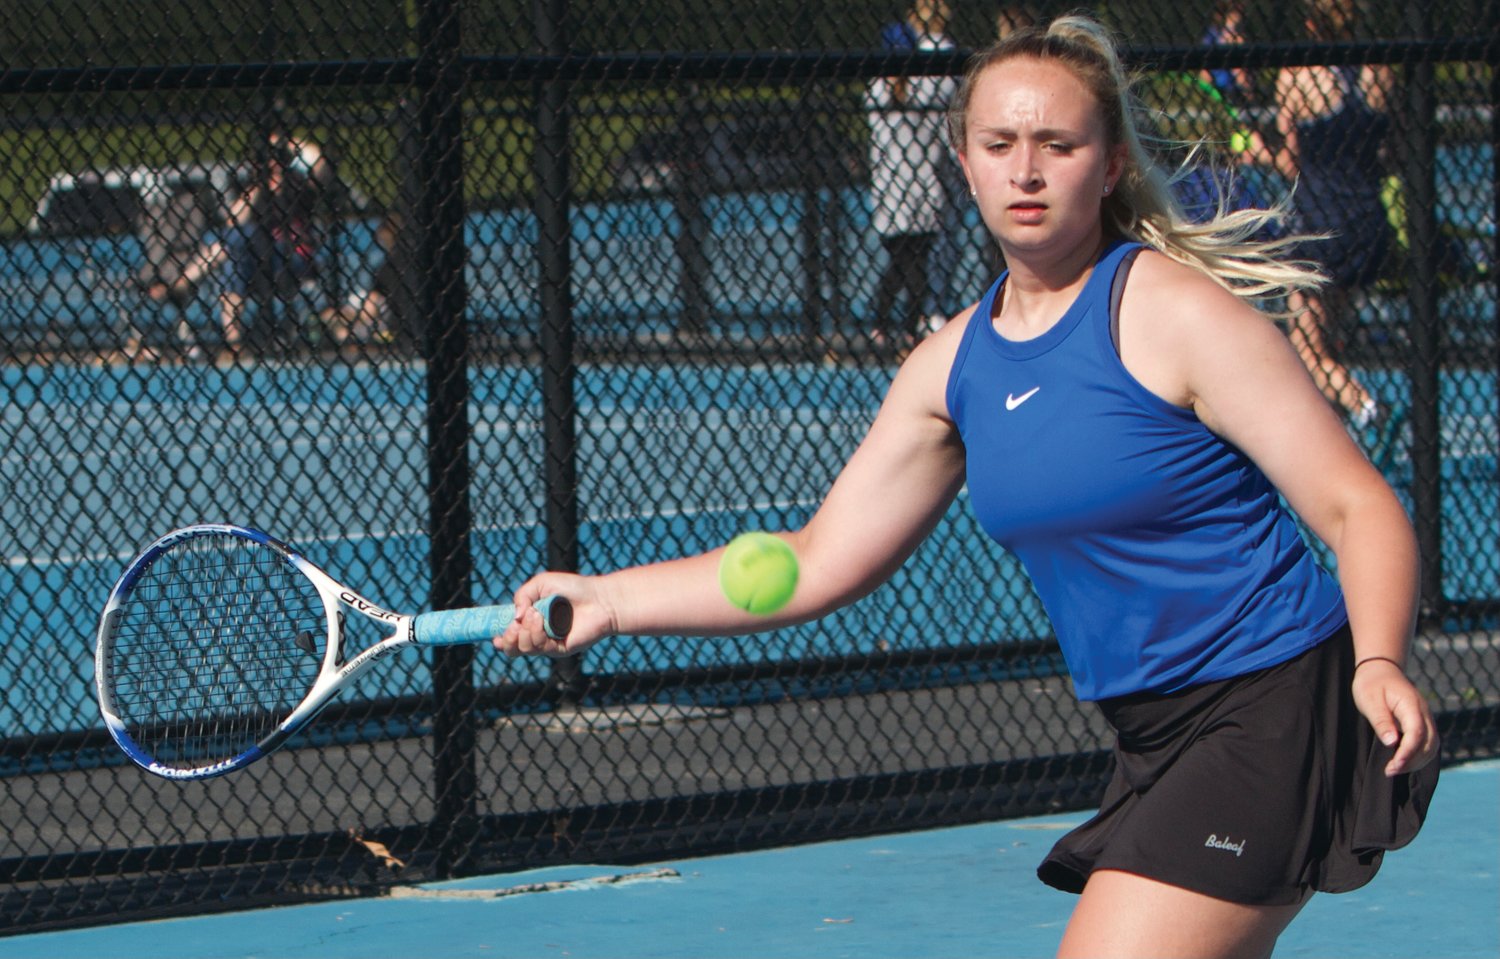 Crawfordsville's Samantha Rohr picked up a win at No. 3 singles 6-0, 6-3 against Fountain Central.